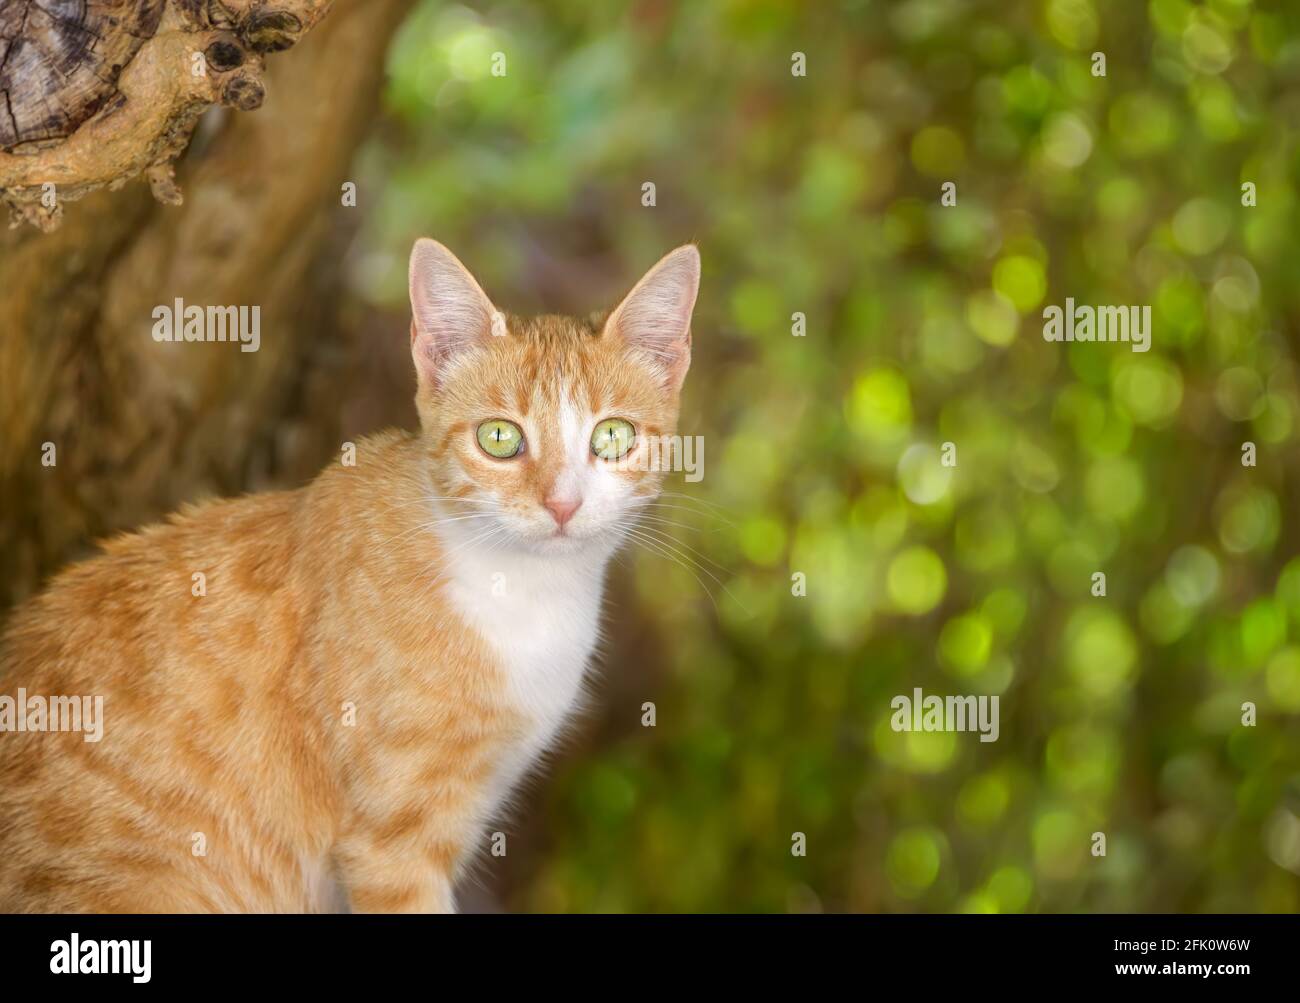 Cute young cat portrait, red tabby with white and geen eyes, looking curiously with green leaves bokeh background Stock Photo